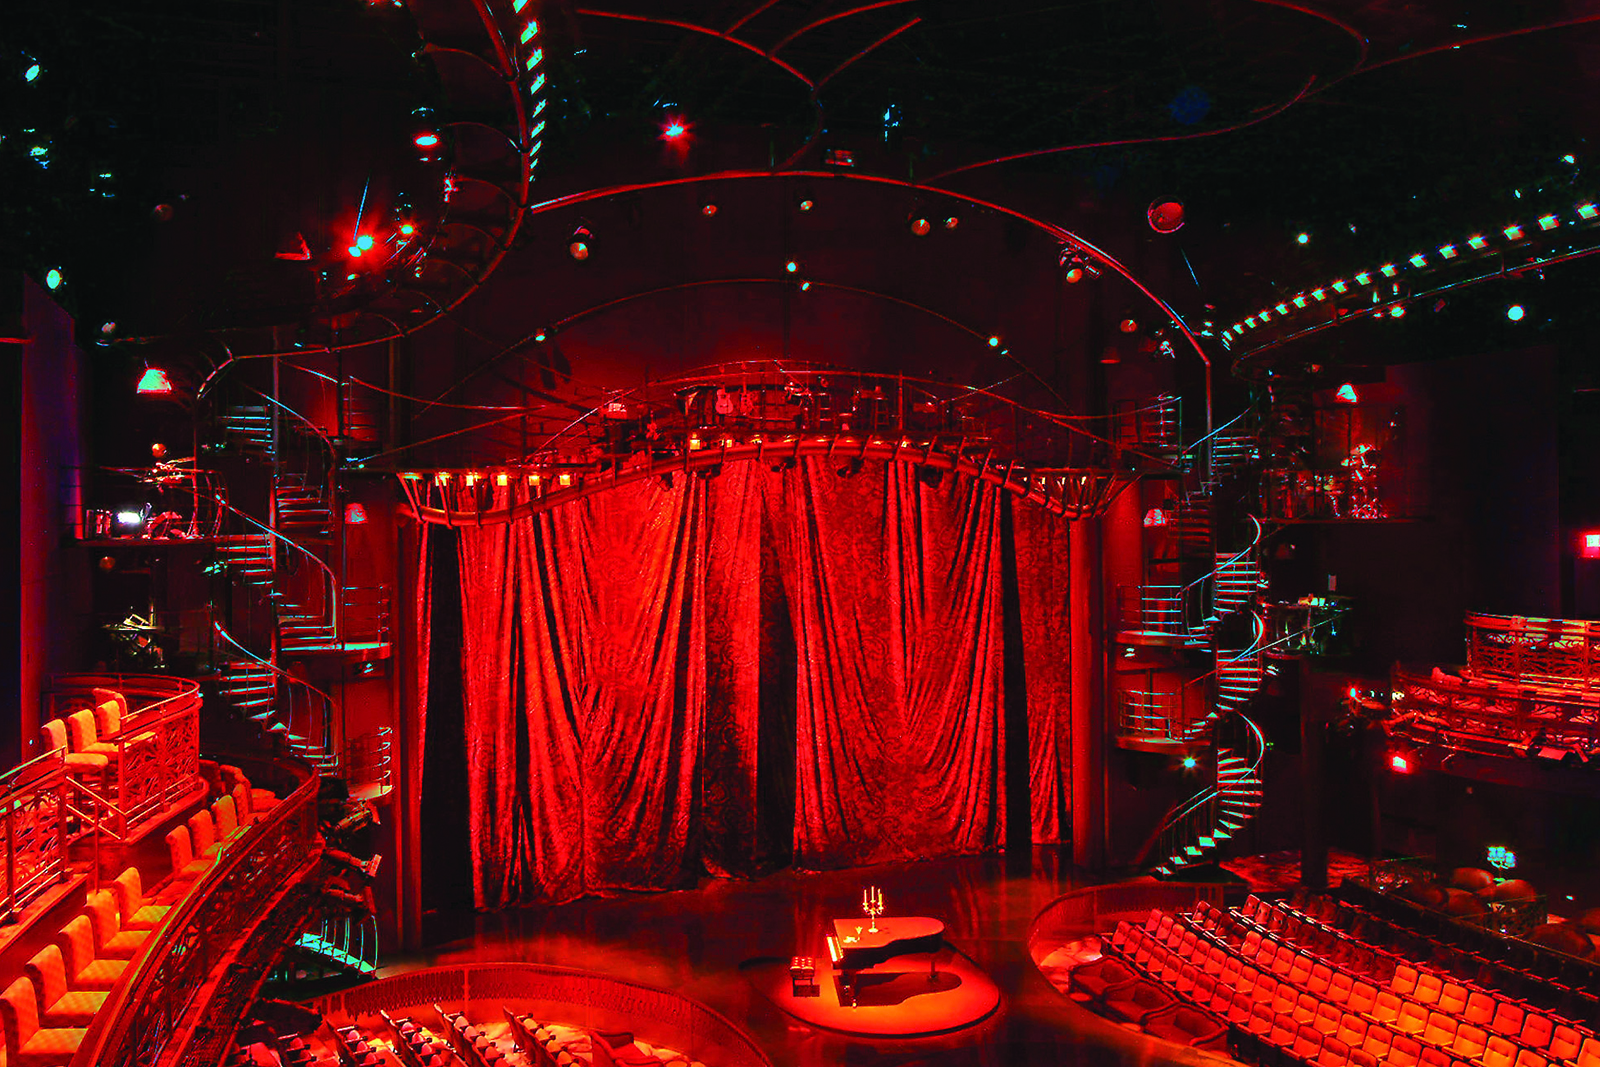 Zumanity tickets, seating, cast, seating chart, and theater.  Located in New York New York Hotel Las Vegas, NV.